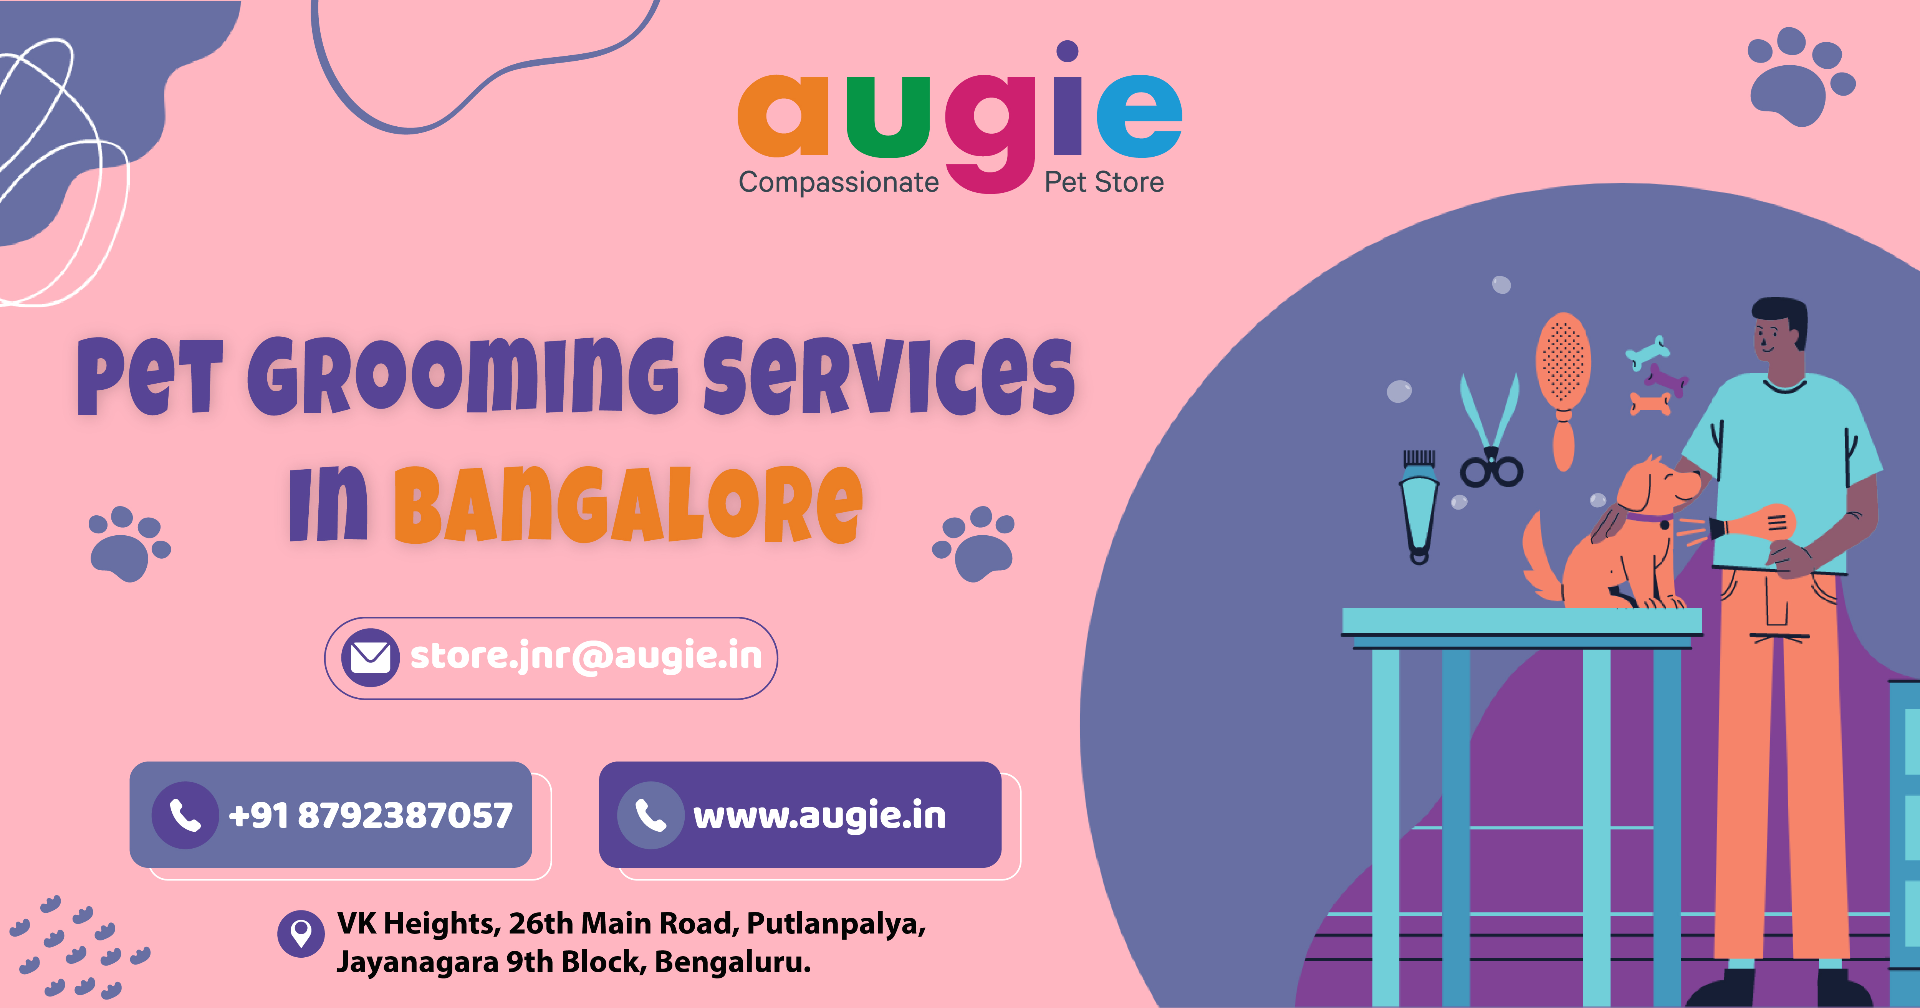 At home pet grooming service in bangalore